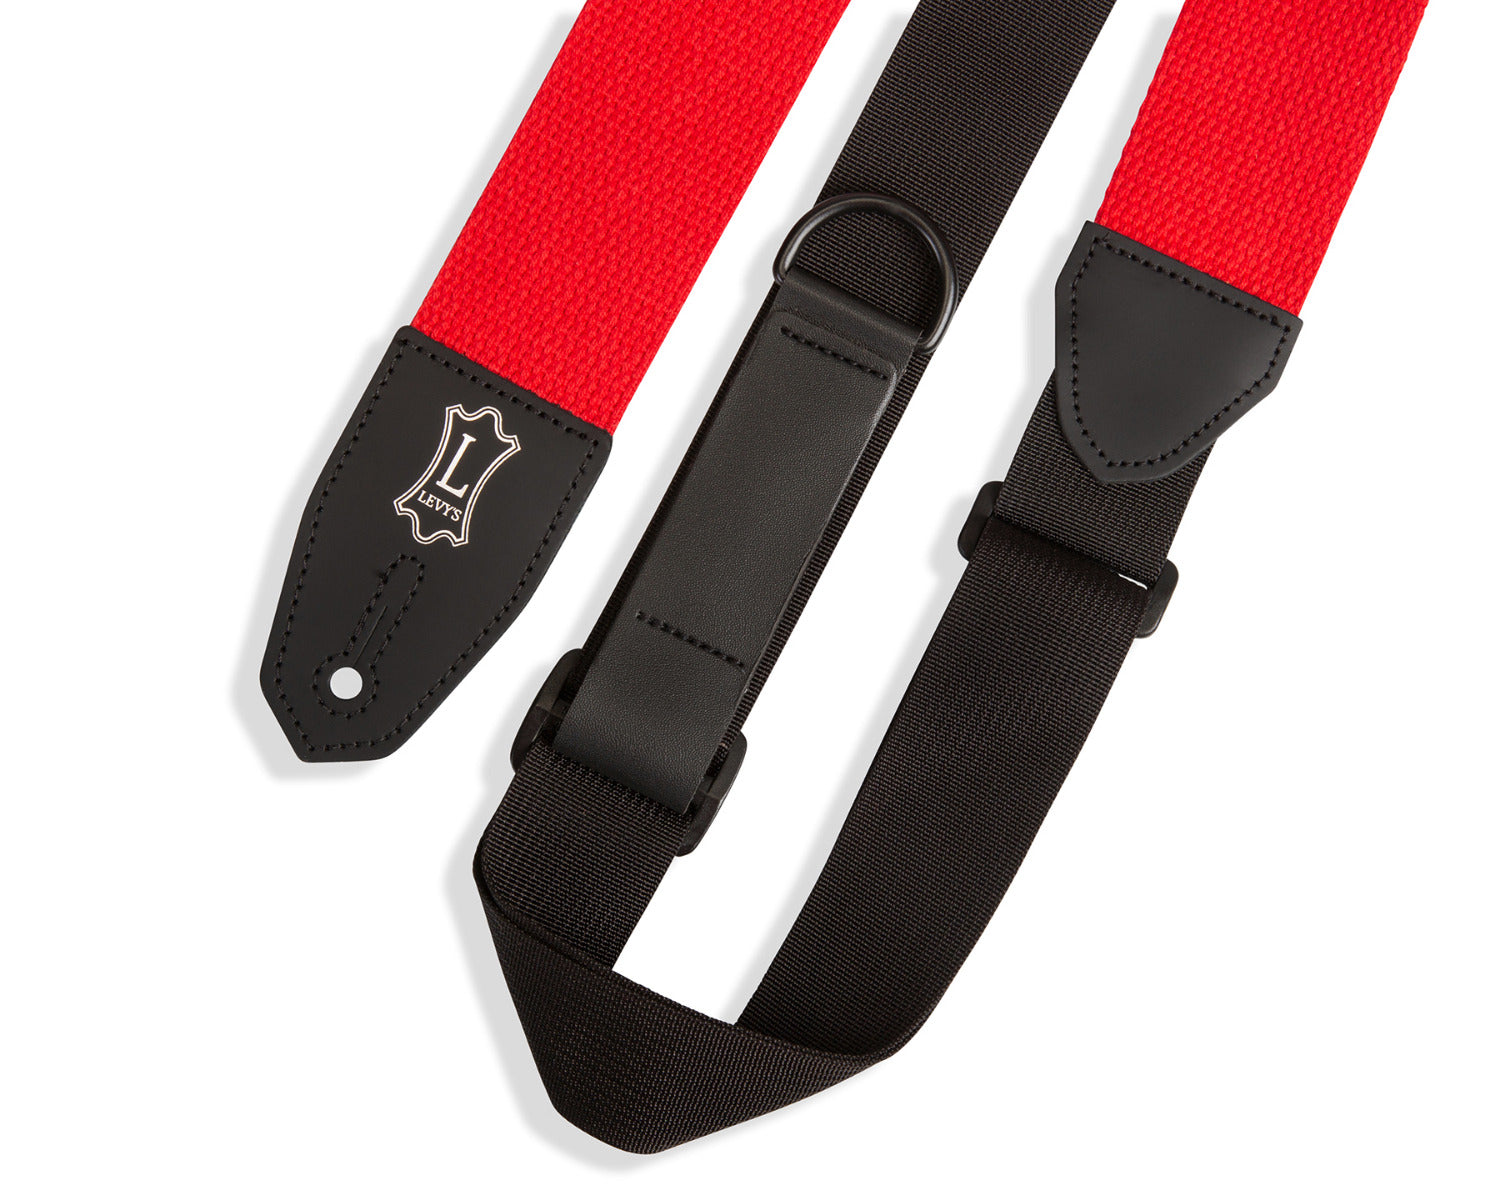 Close image of red Levy's Right Height guitar strap